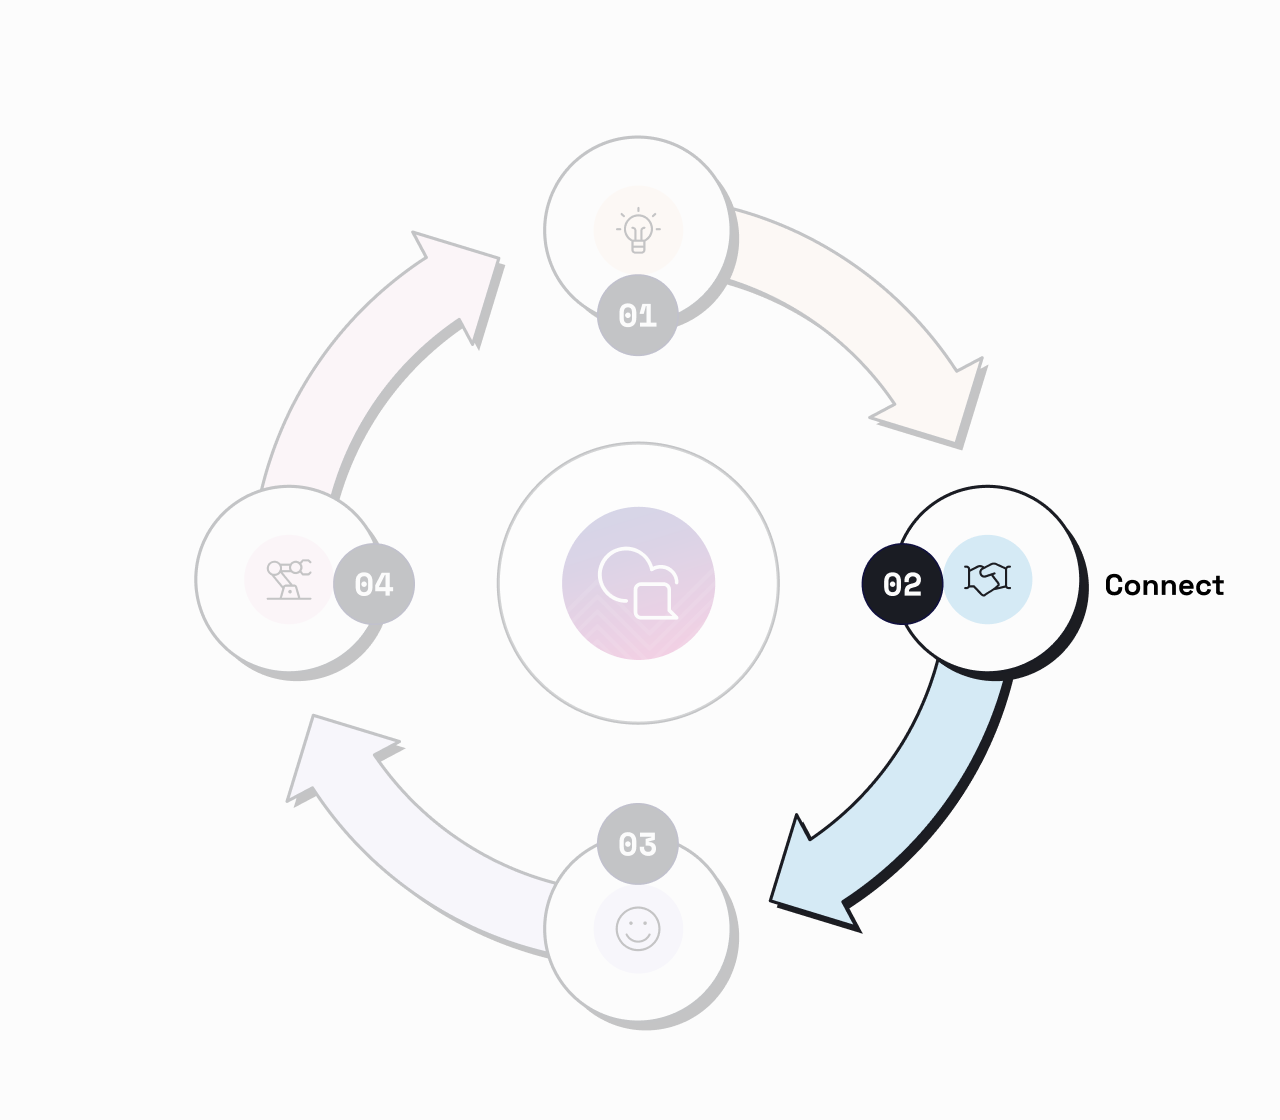 Connect stage of the Conversational Flywheel, showing how voice + omnichannel solutions can expand customer engagement